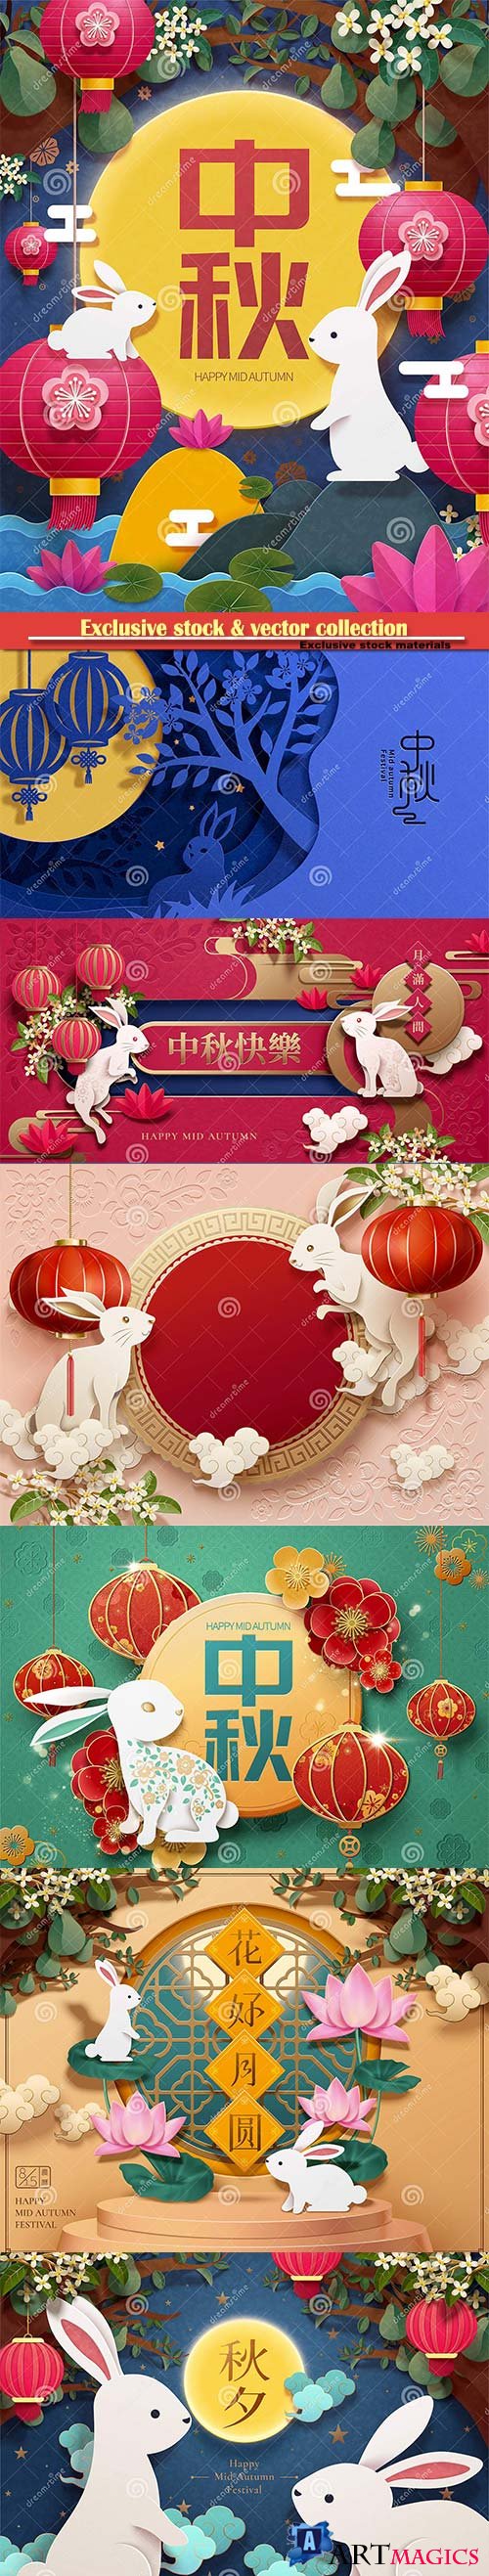 Mid autumn festival paper art design with rabbit, lanterns and the full moon decorations